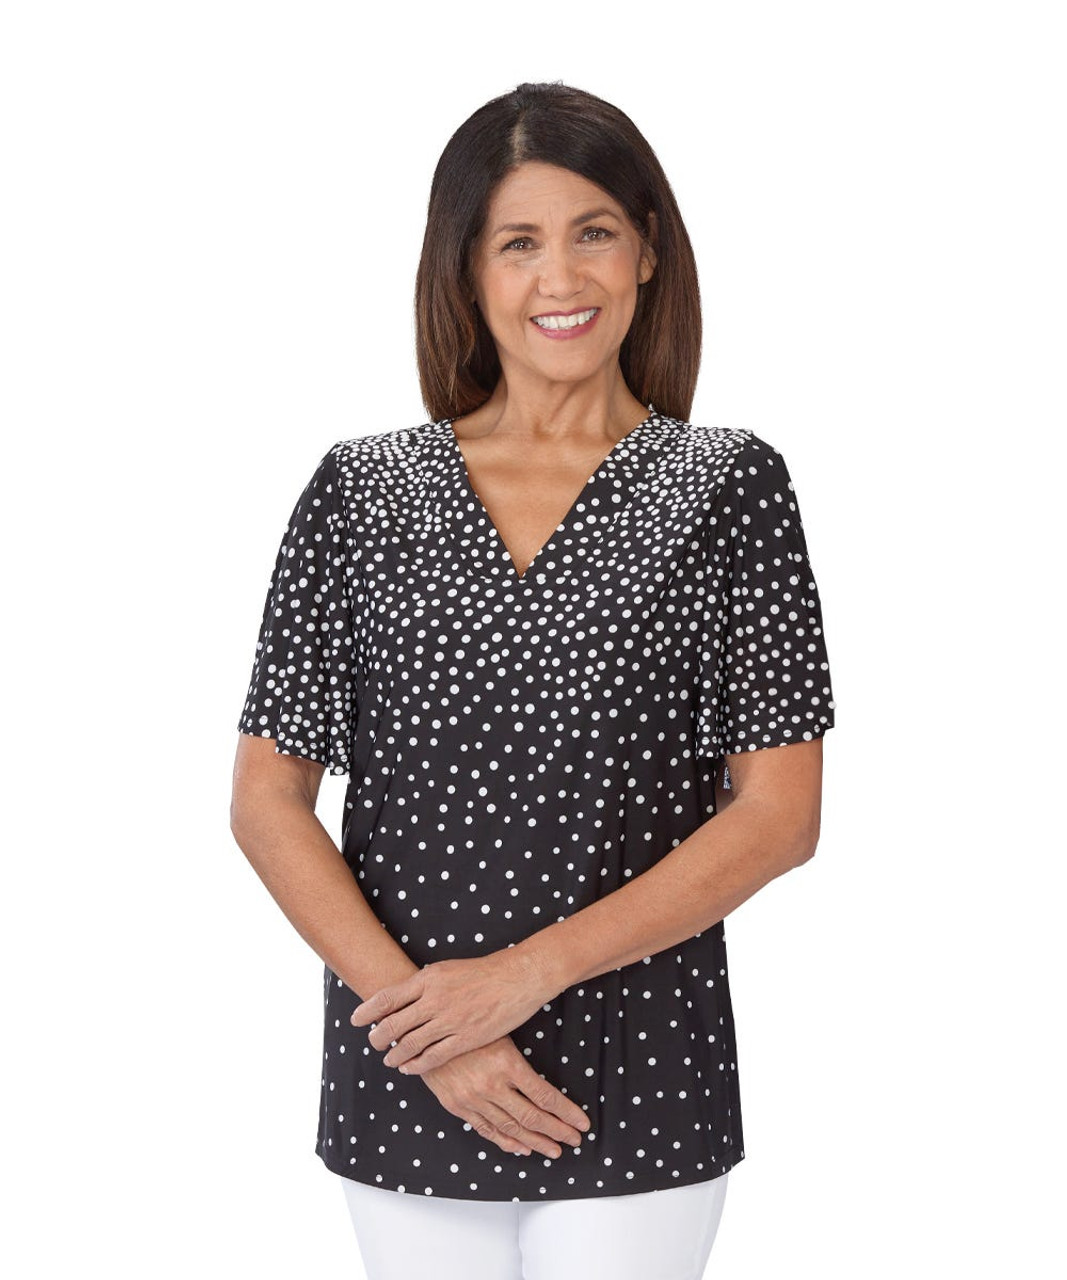 Silverts SV41080 Wide Bell Sleeve Top For Easy Self Dressing White Dots, Size=S, SV41080-SV1284-S